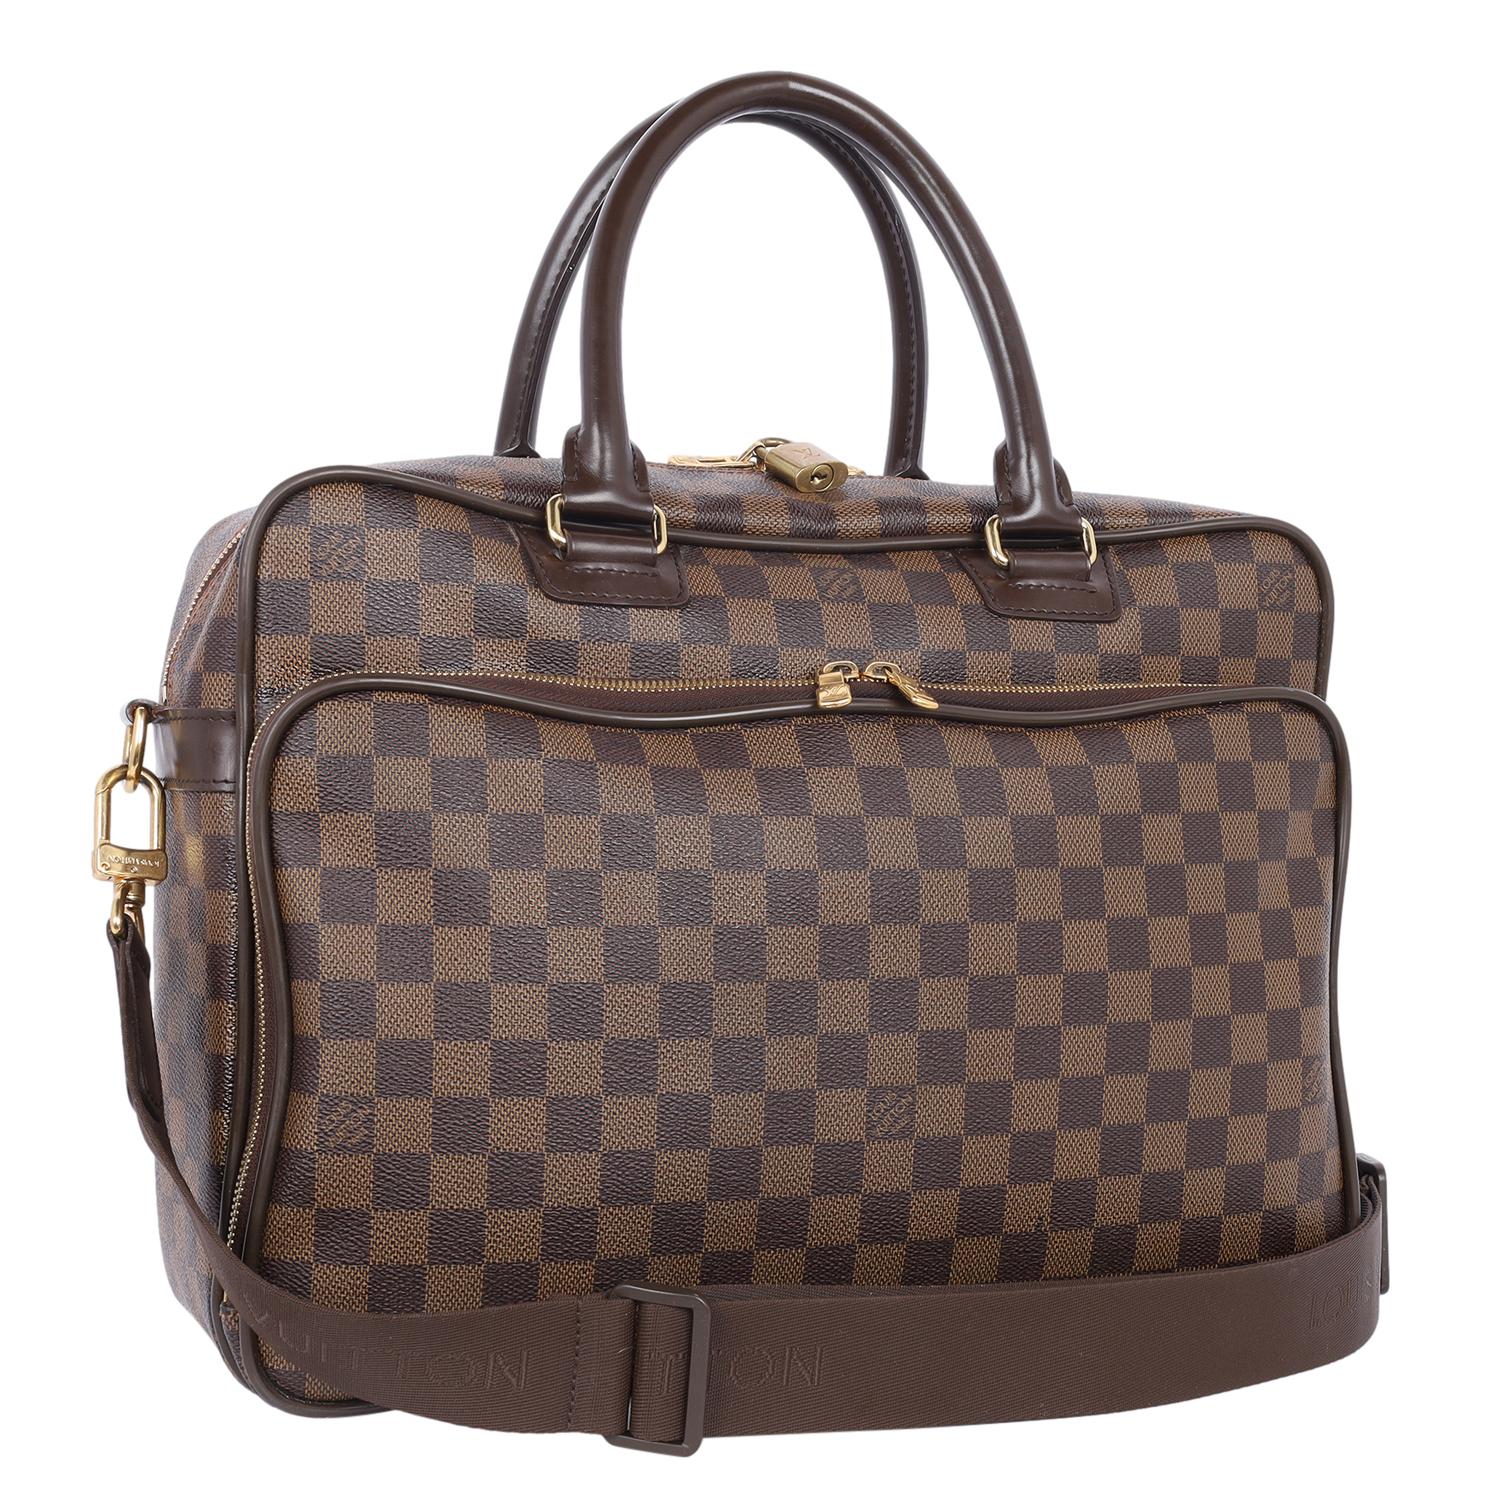 Authentic, pre-loved Louis Vuitton Icare messenger bag in brown Damier Ebene canvas. Features Damier Ebene canvas, top leather handles, dual zipper top closure, front pocket with dual zippers, gold tone hardware. The Interior has an brown lining